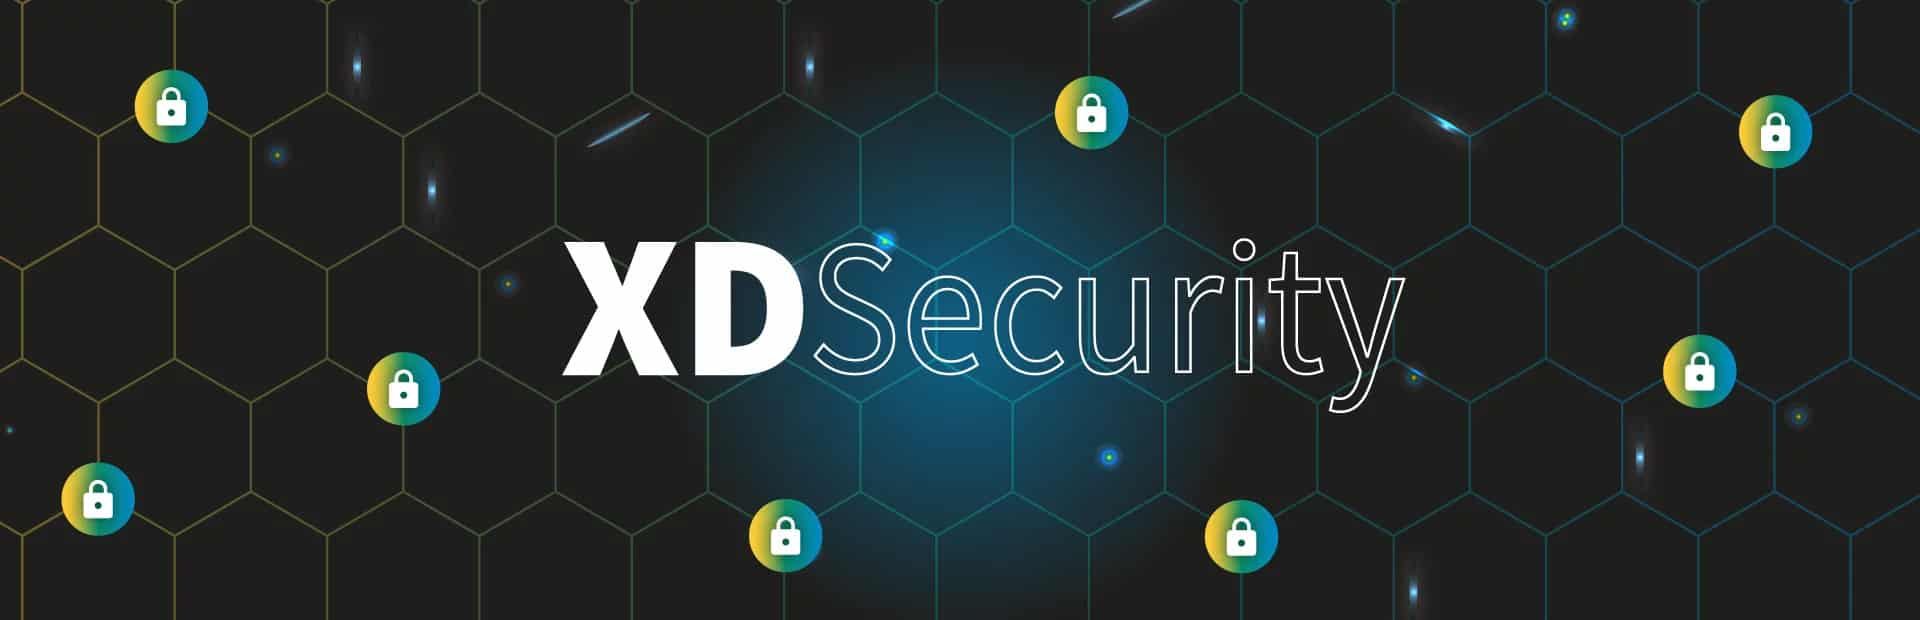 XDSecurity